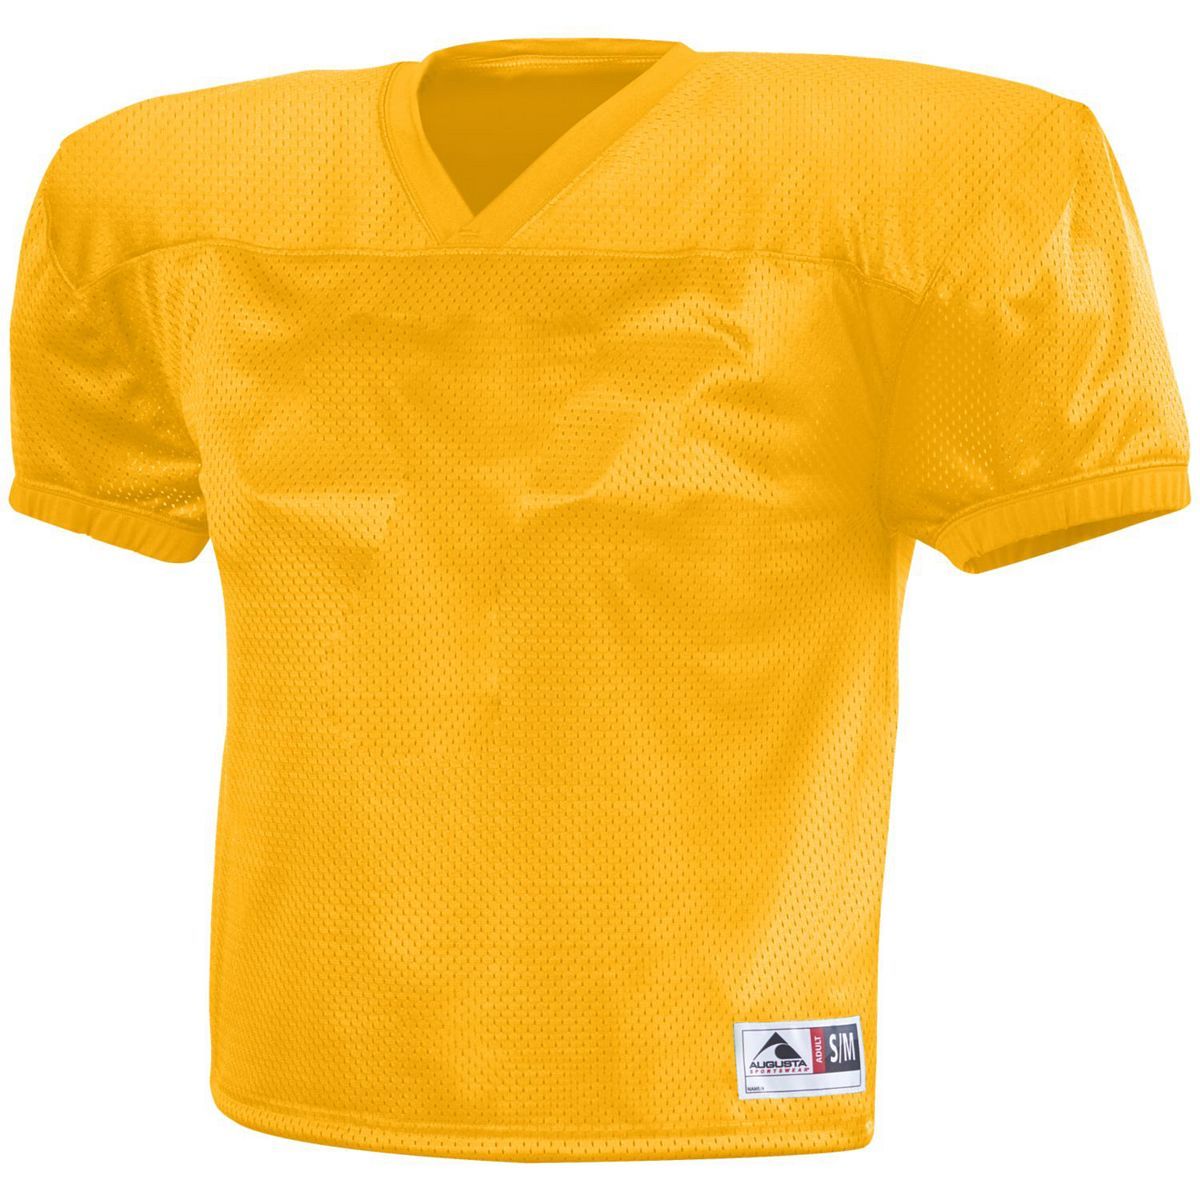 Augusta Sportswear Dash Practice Jersey in Gold  -Part of the Adult, Adult-Jersey, Augusta-Products, Football, Shirts, All-Sports, All-Sports-1 product lines at KanaleyCreations.com